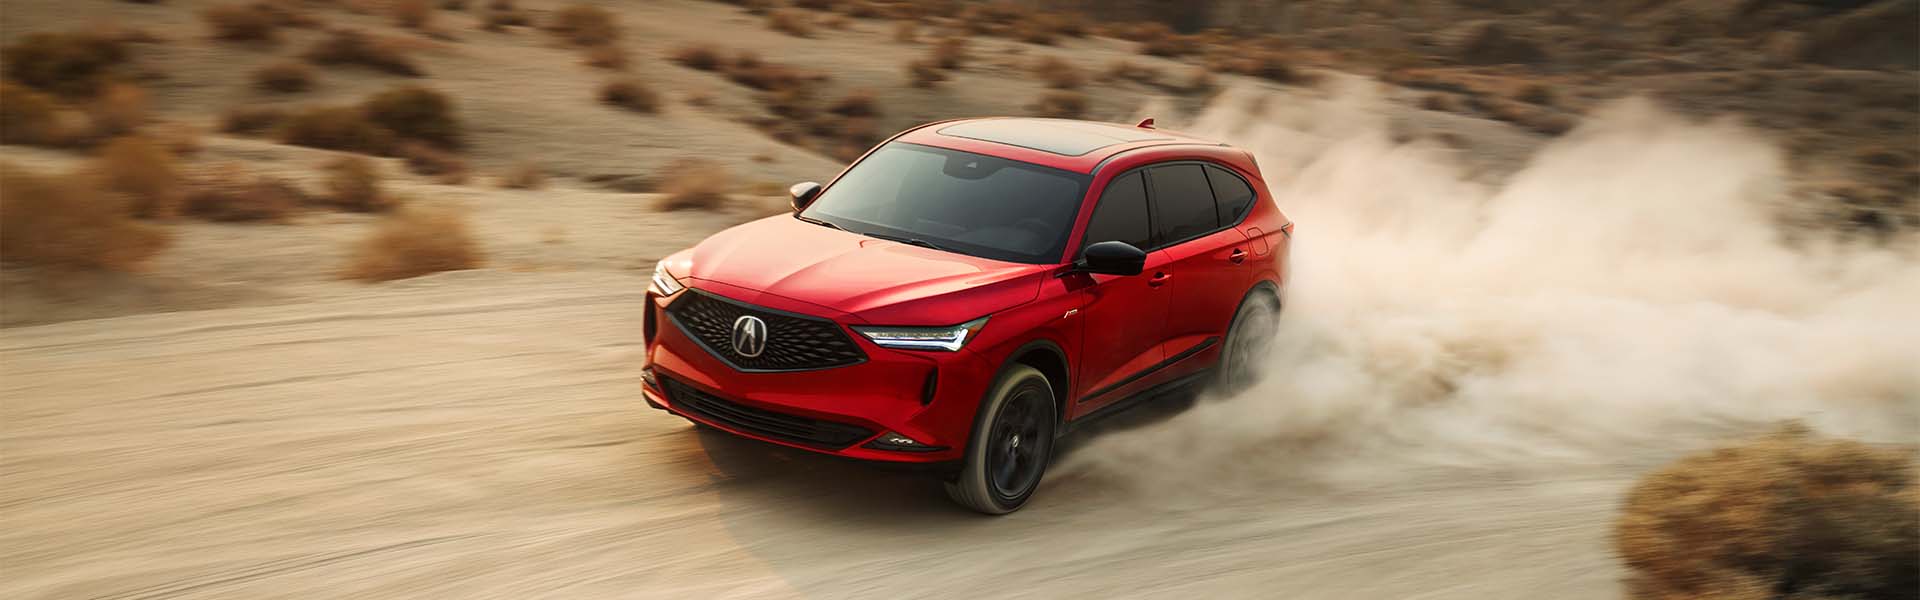 Model Features of the 2022 Acura MDX at Bobby Rahal Acura | Red 2022 Acura MDX Driving Fast Through Desert, Kicking Sand Up Behind it